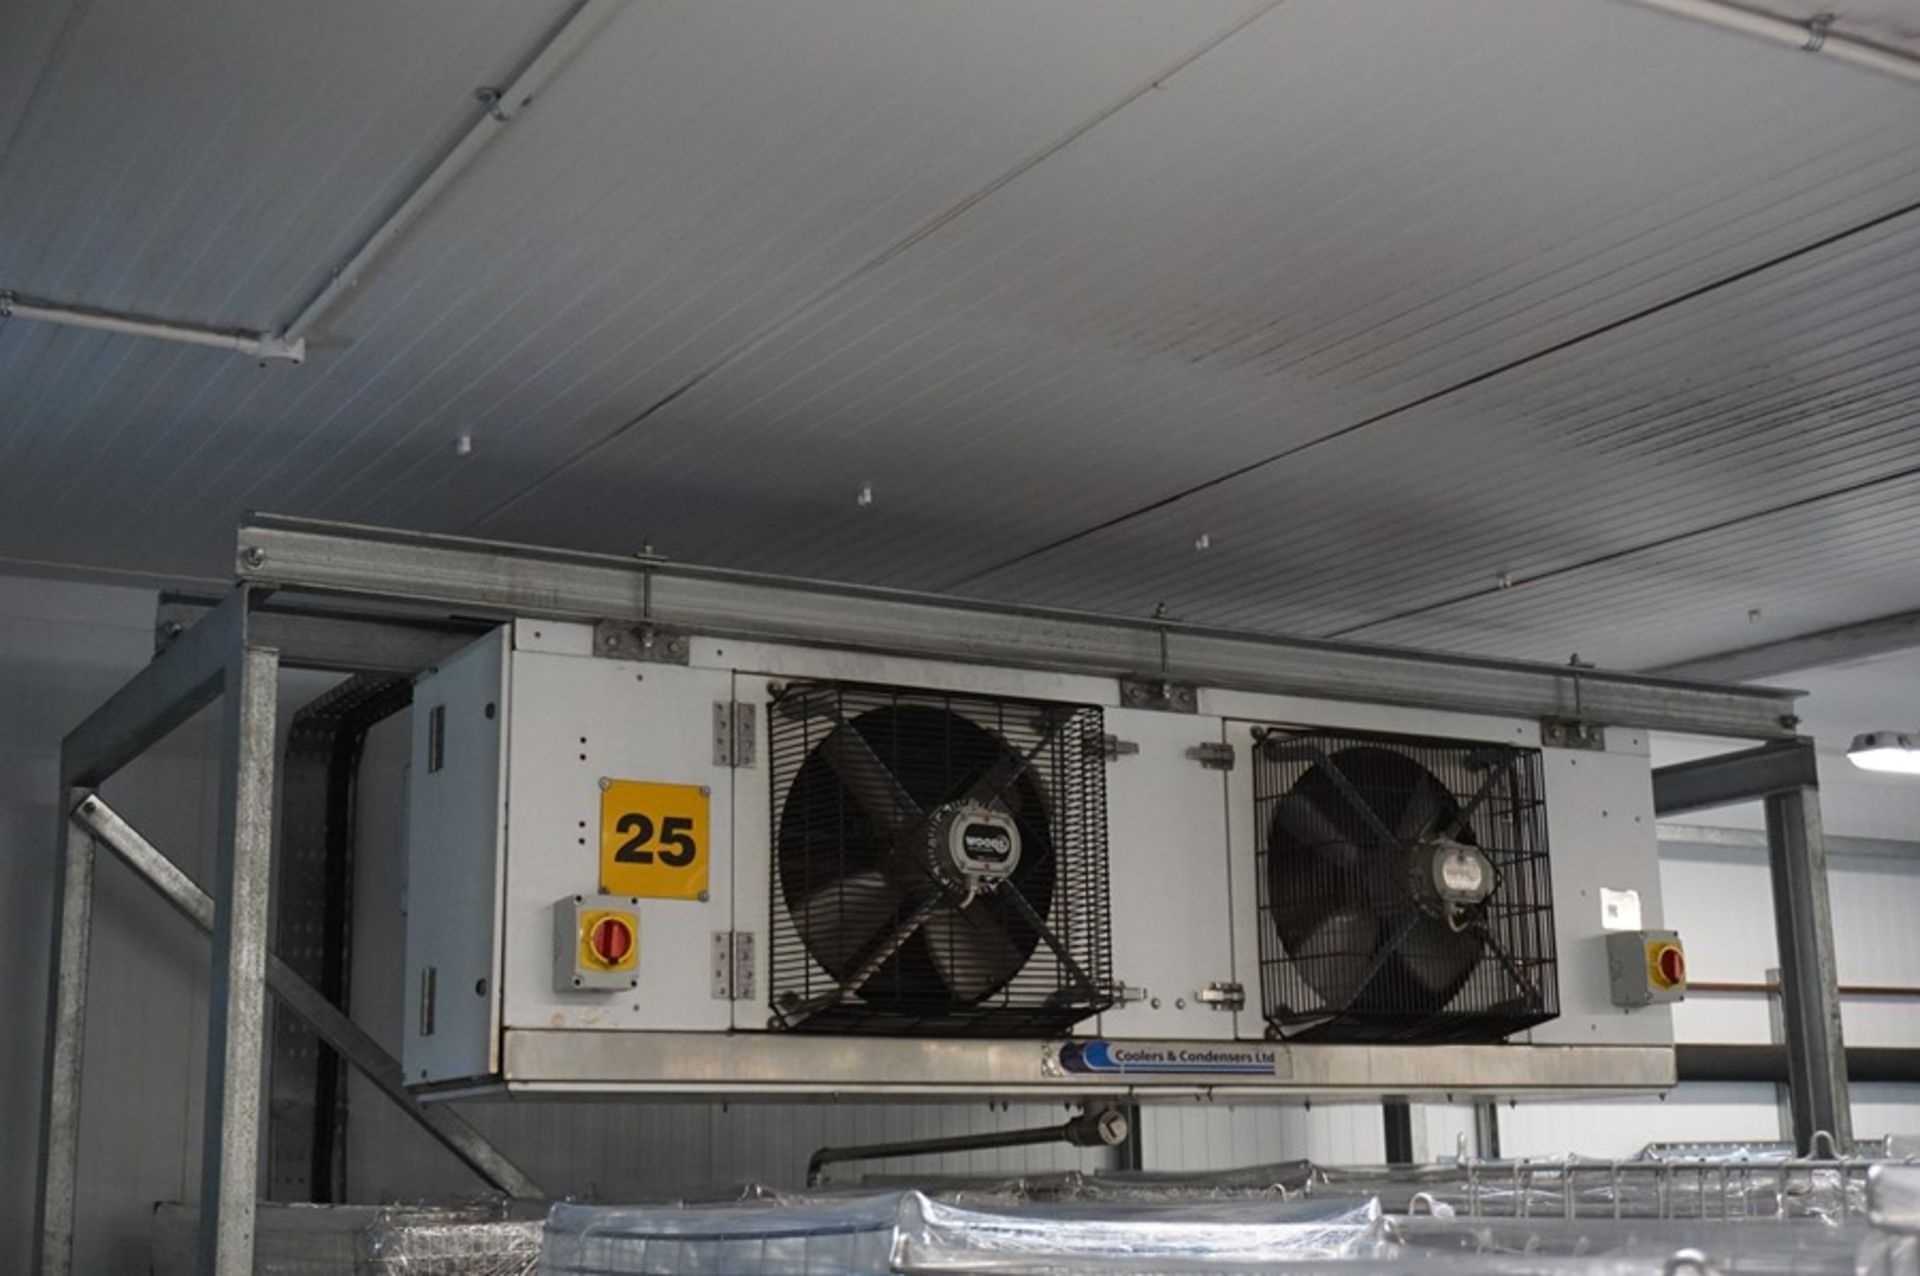 Coolers & Condensers, Model: CA10, twin fan chiller unit, Serial No. 0009219 (1998) with support